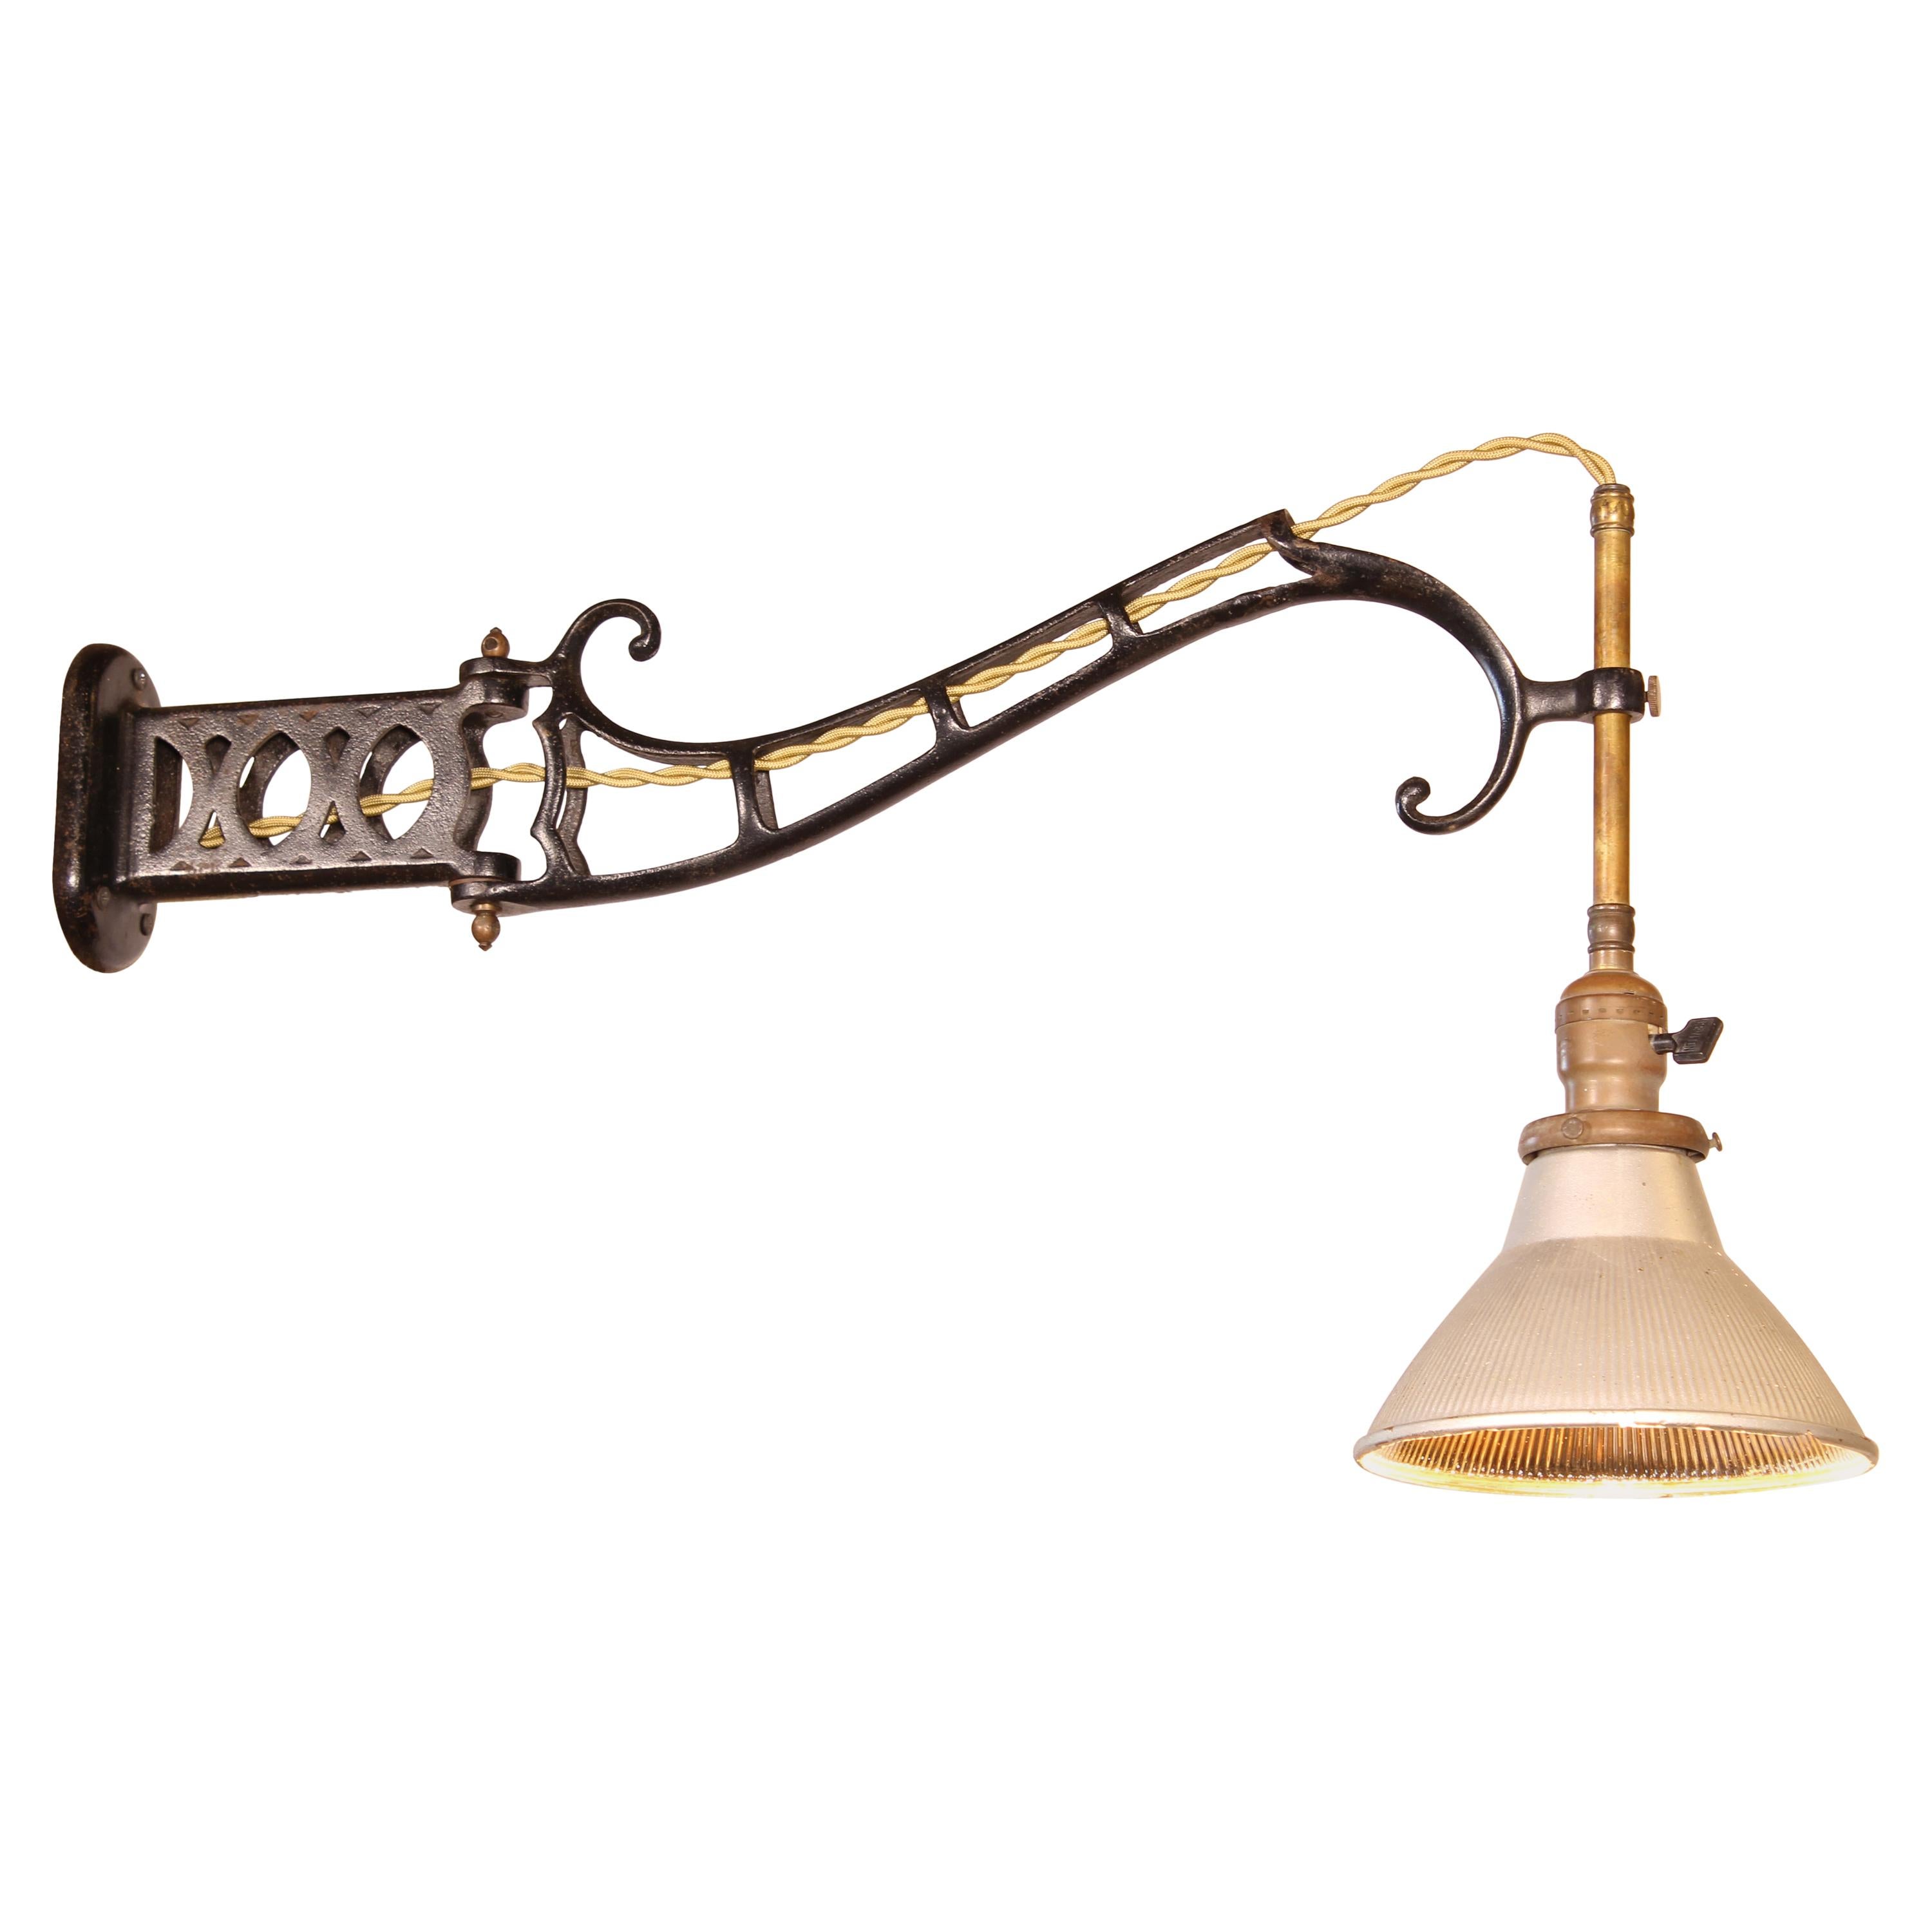 Faries Wall Sconce with Mercury Glass Shade, Cast Iron Adjustable Lamp / Light